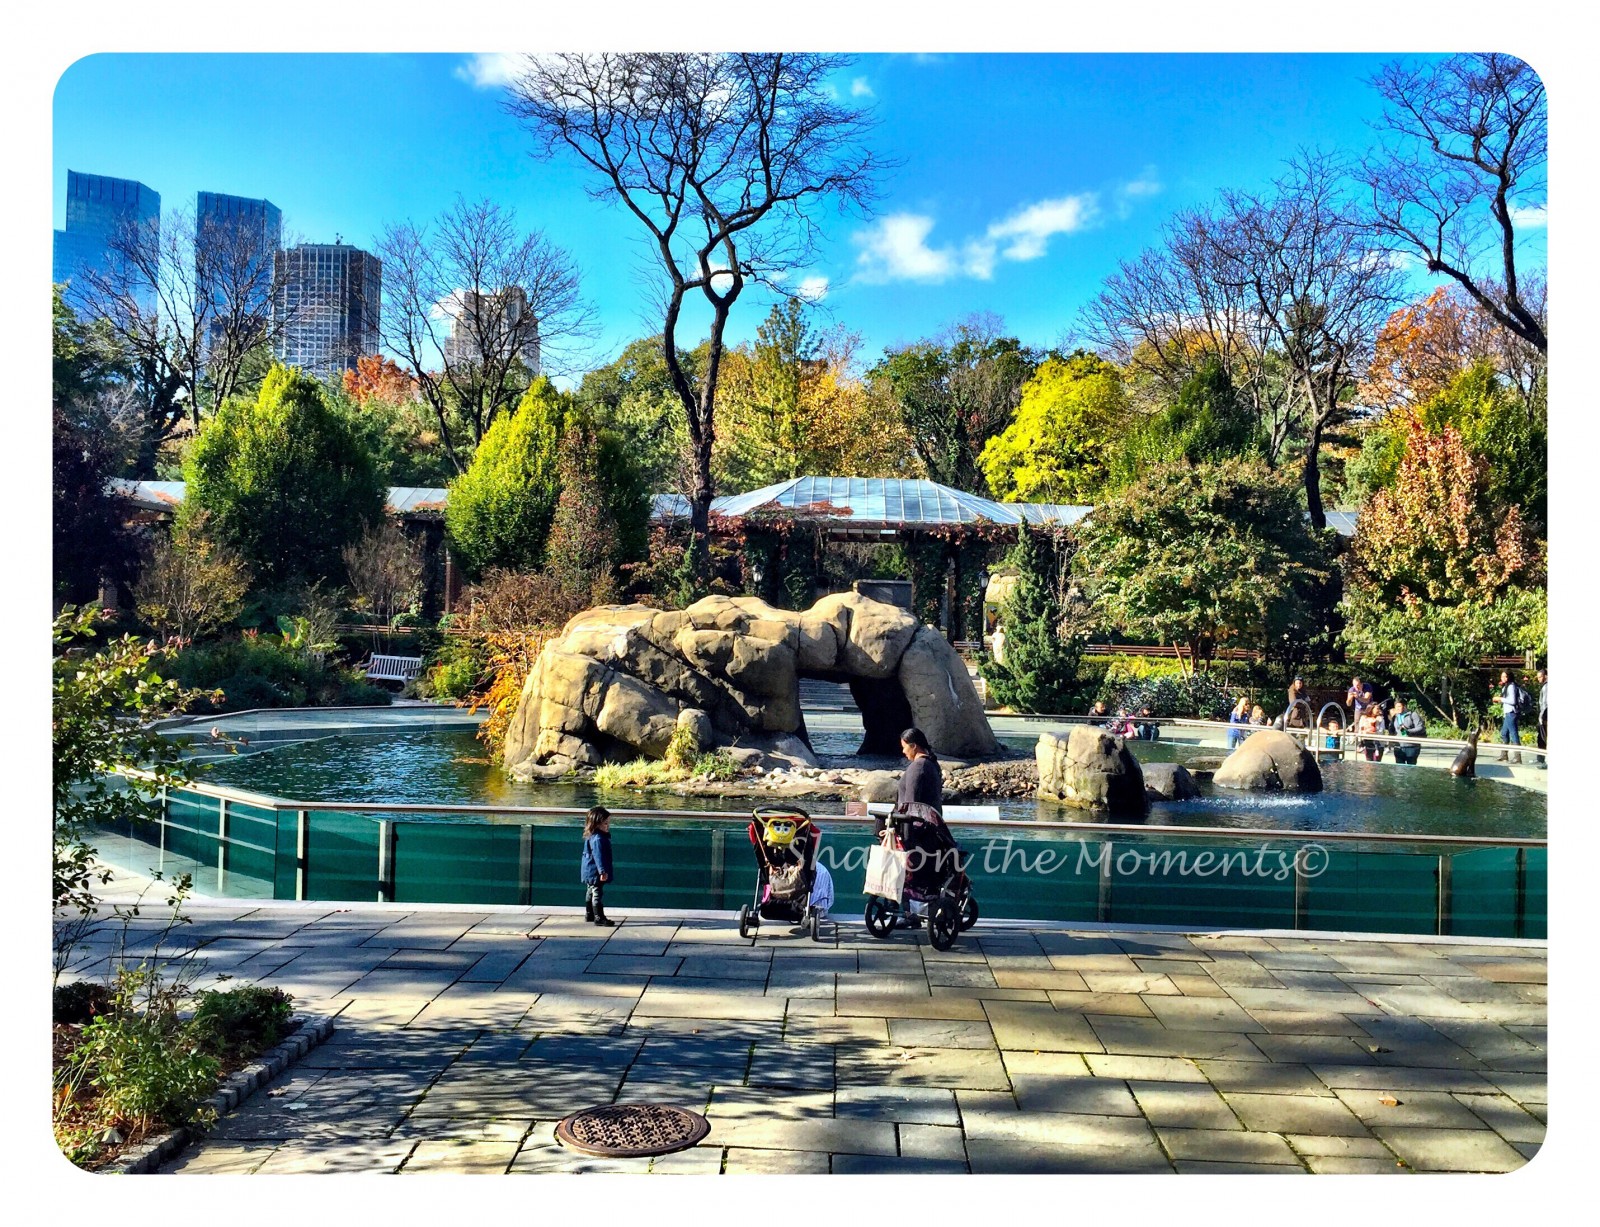 Central Park in New York City Hidden Gem - Sharon the Moments